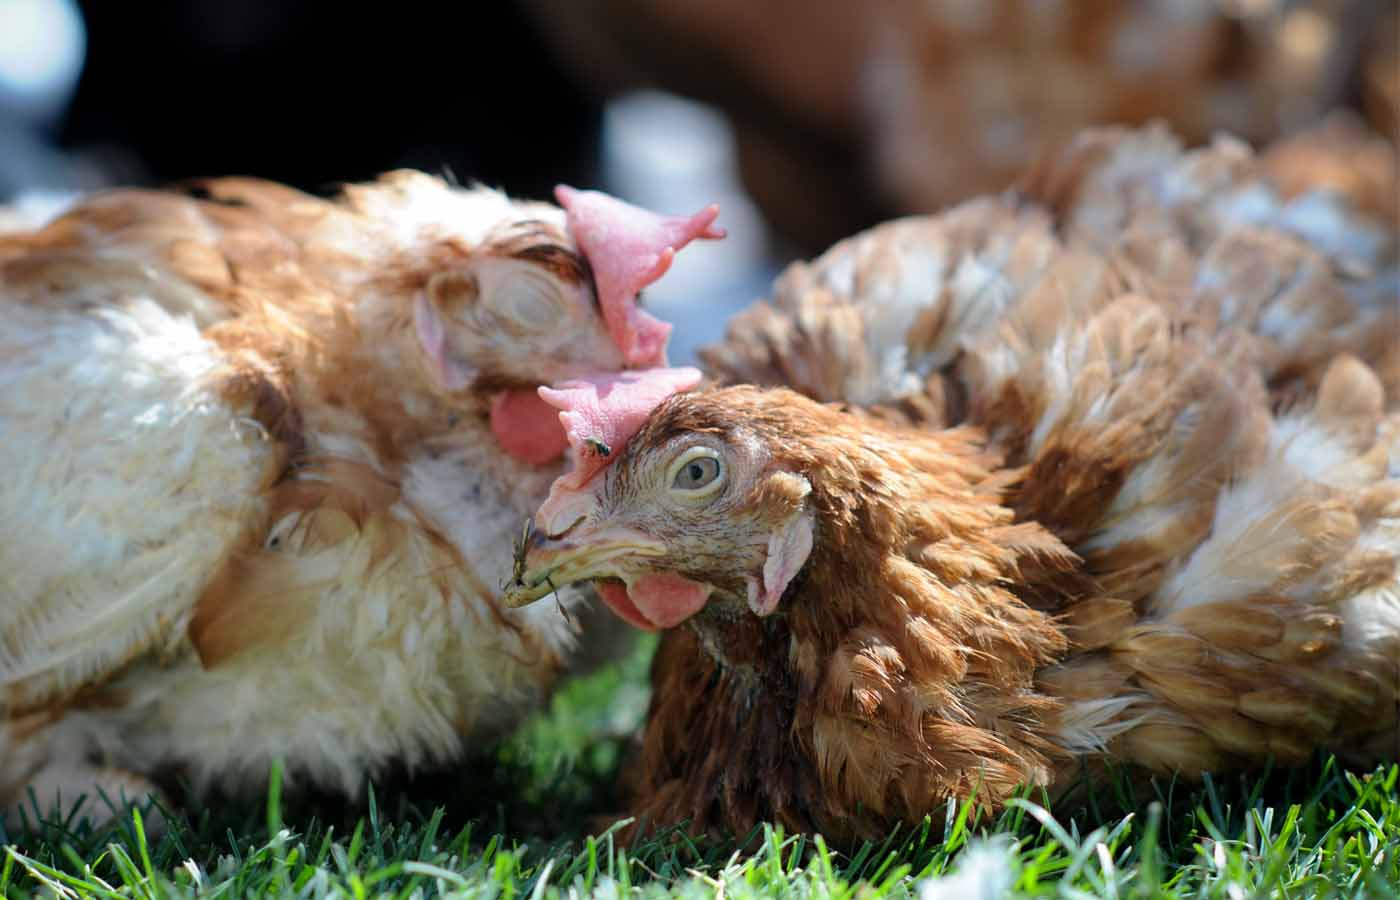 Two rescued hens feel the sun for the first time